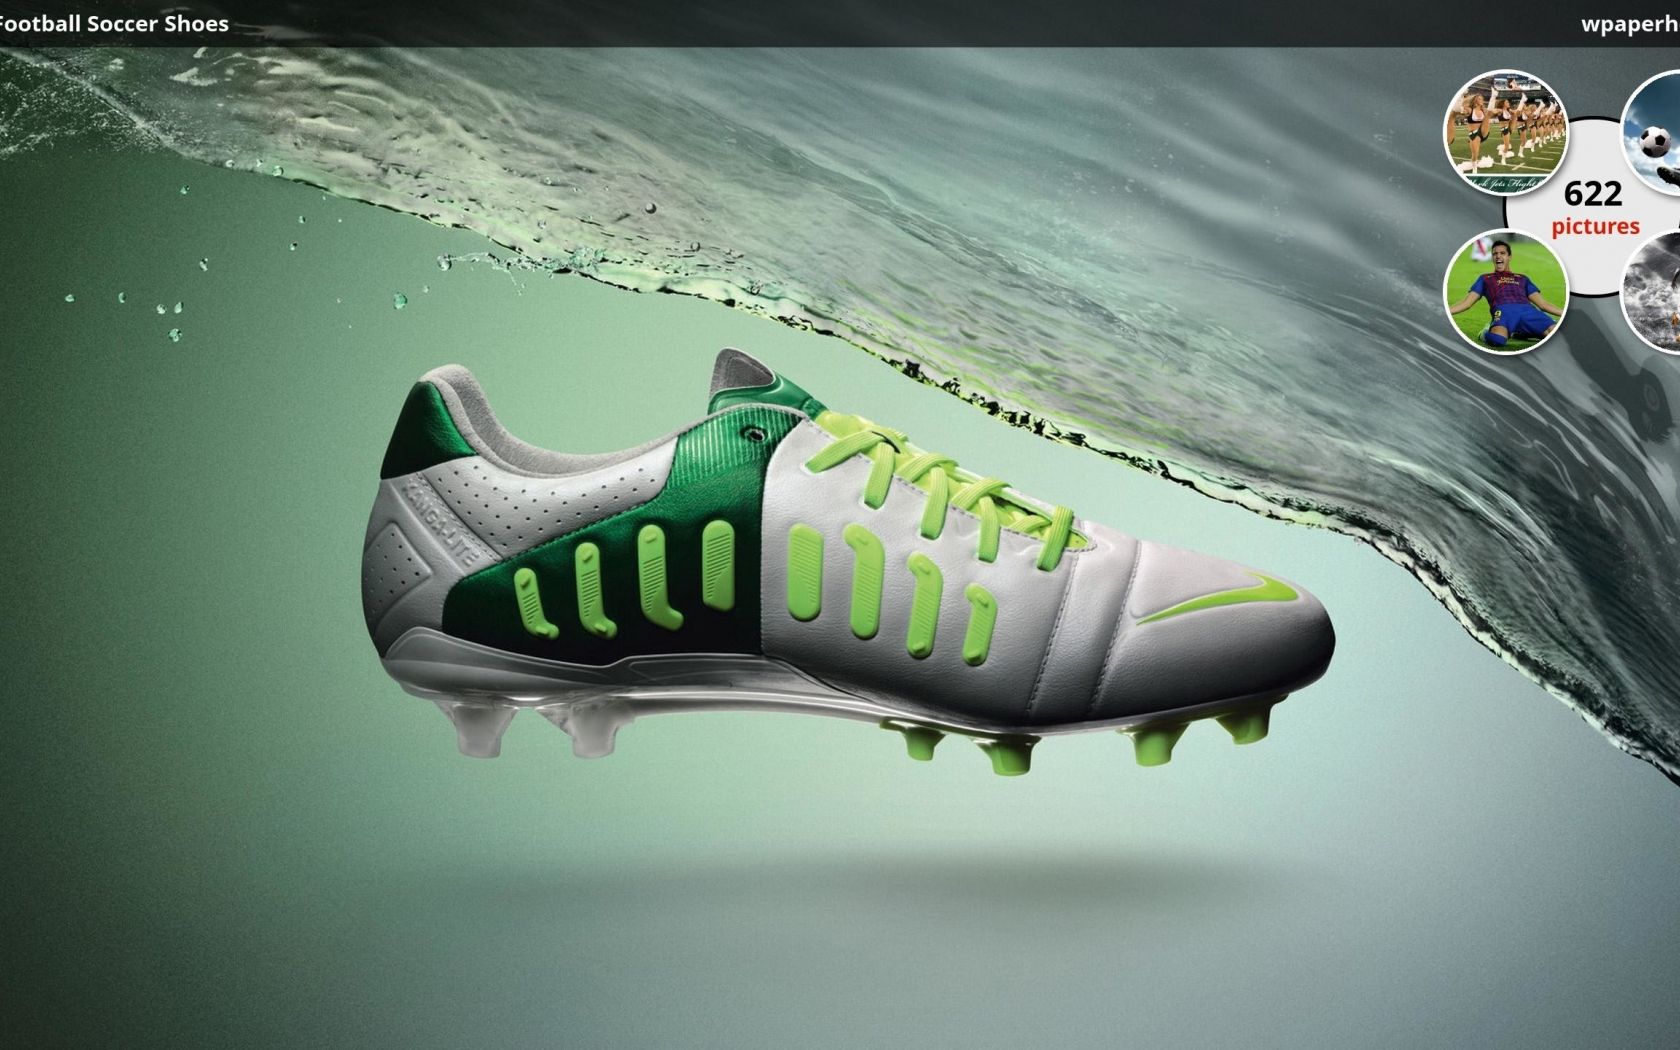 Free download Soccer Cleats Wallpaper - [2560x1440]